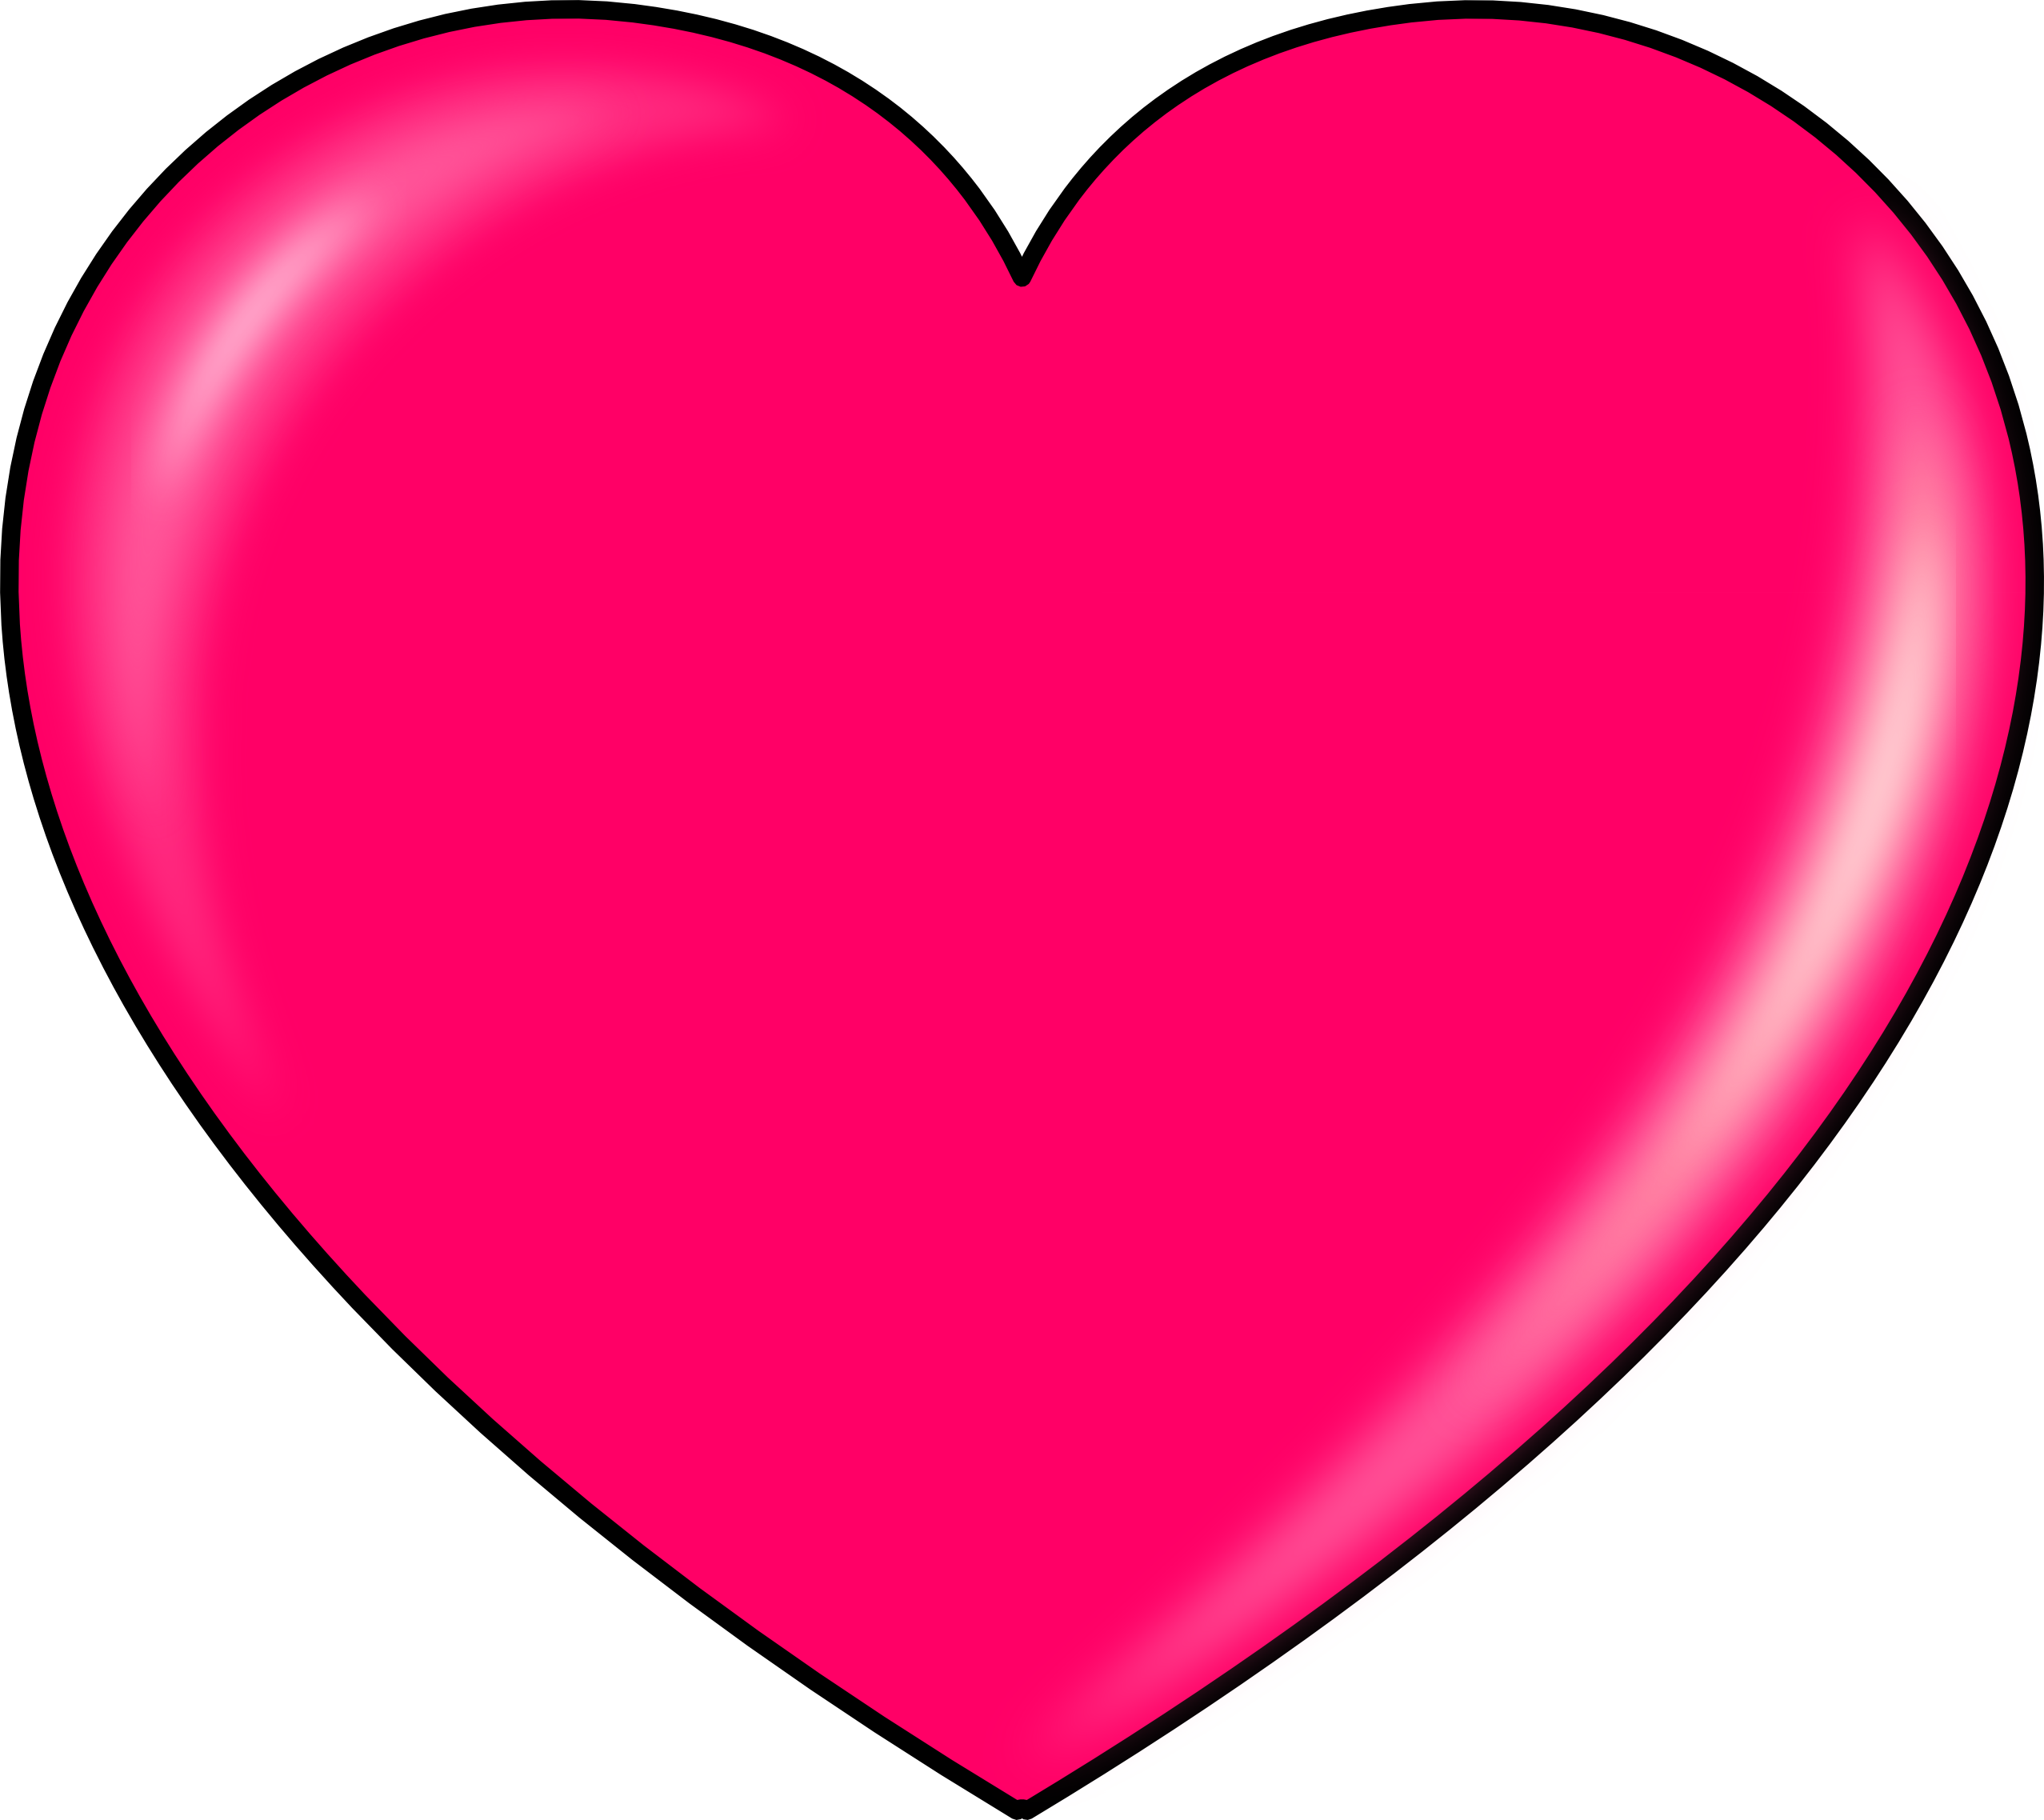 Pink heart PNG image, free download